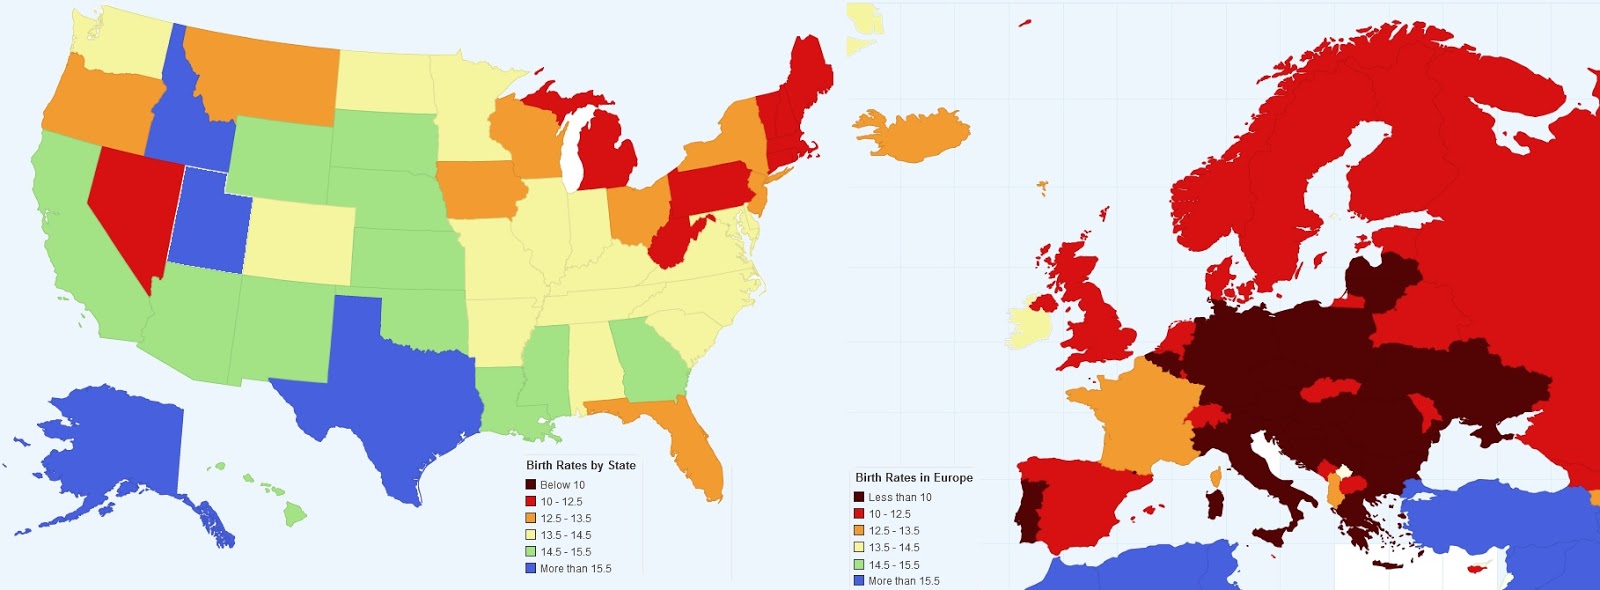 Birth Rates Of European Countries Compared To U S States Vivid Maps